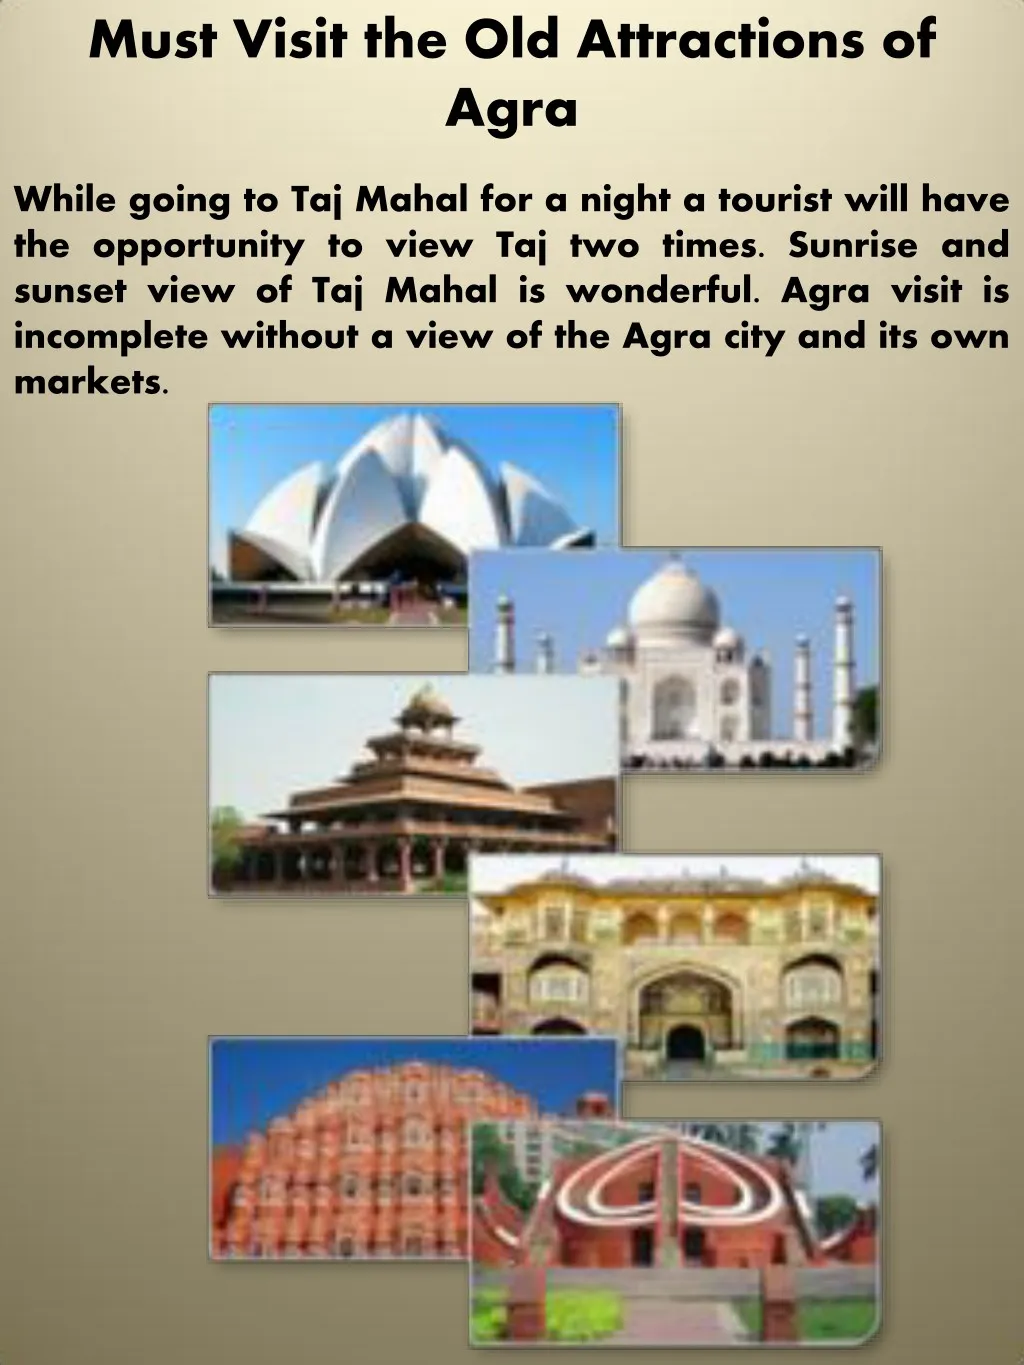 must visit the old attractions of agra